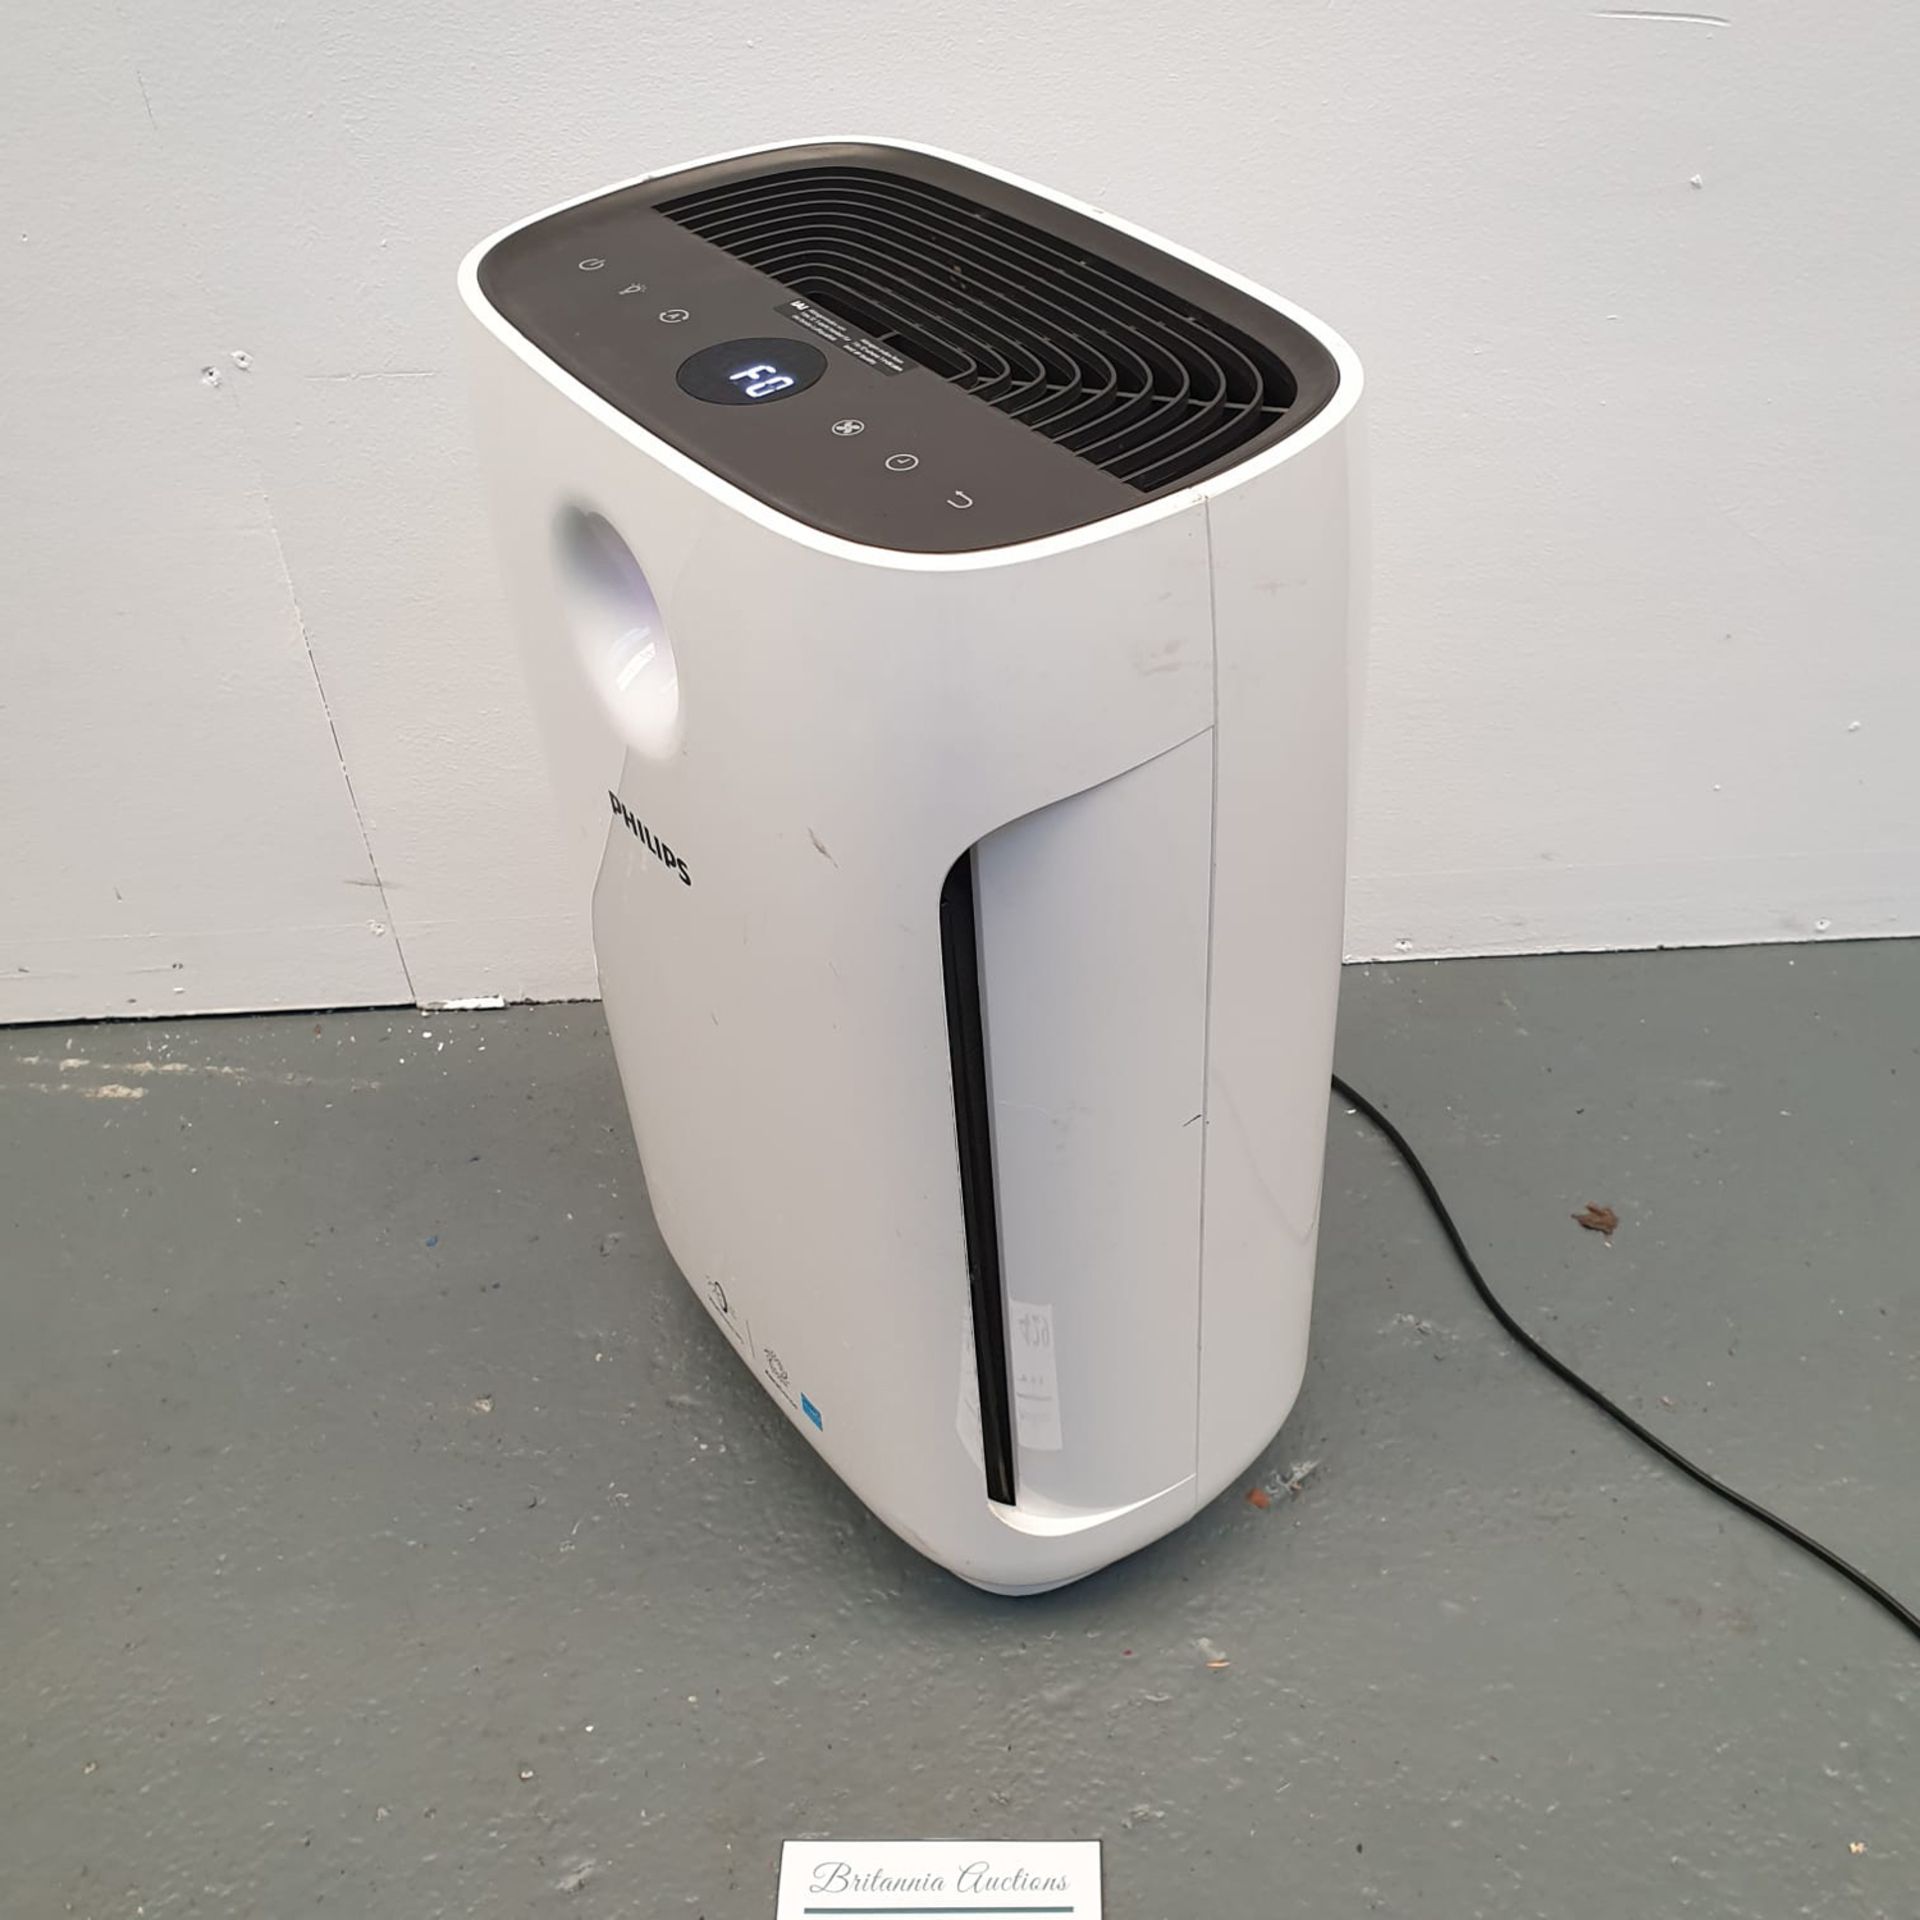 Philips Air Purifier. Single Phase. - Image 5 of 5